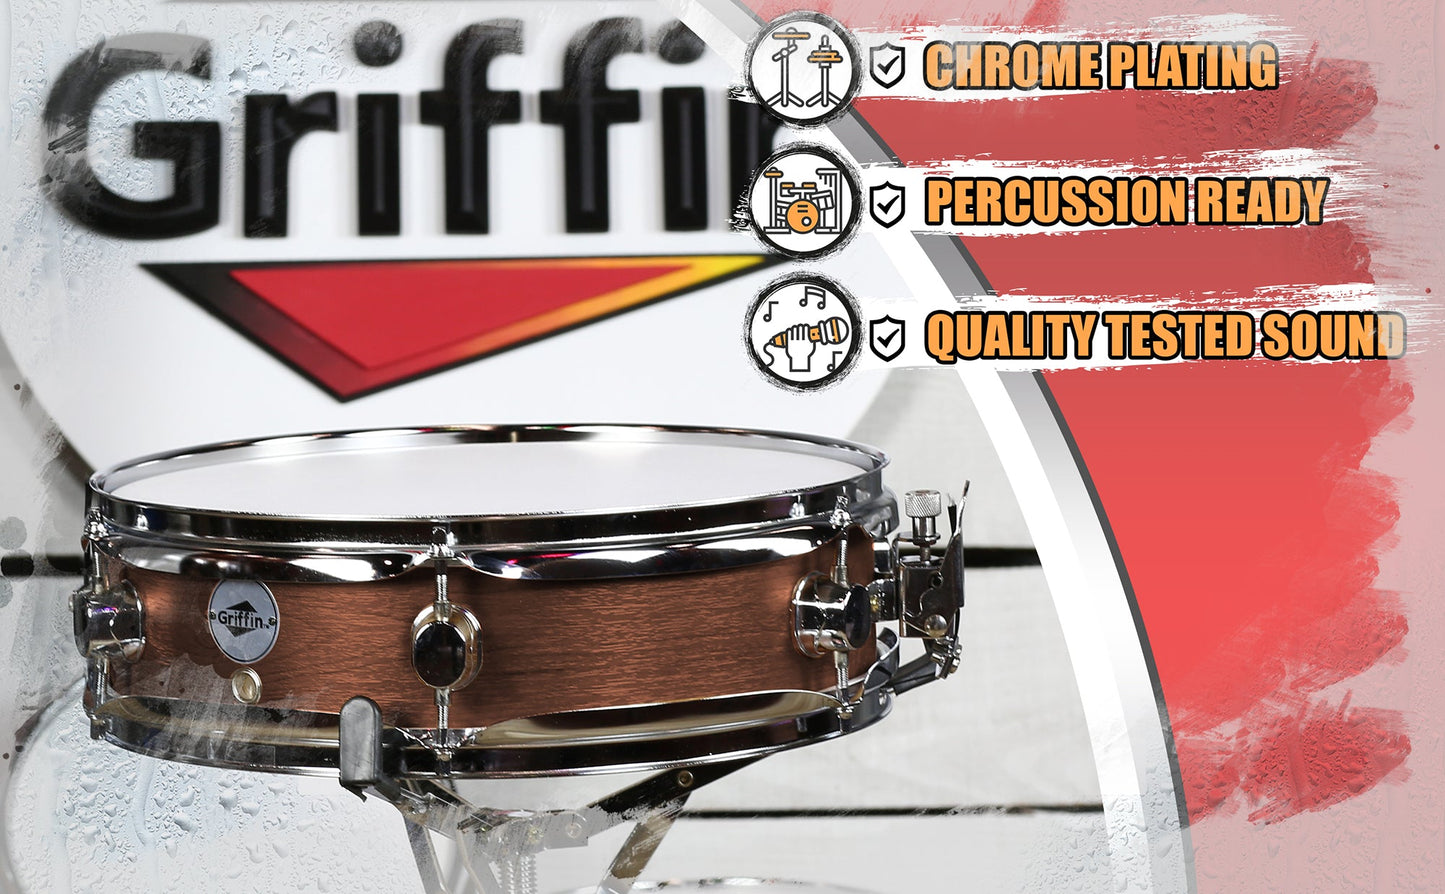 Piccolo Snare Drum 13" x 3.5" by GRIFFIN - 100% Poplar Wood Shell with Black Hickory Finish & Coated Drum Head - Drummers Acoustic Marching Kit